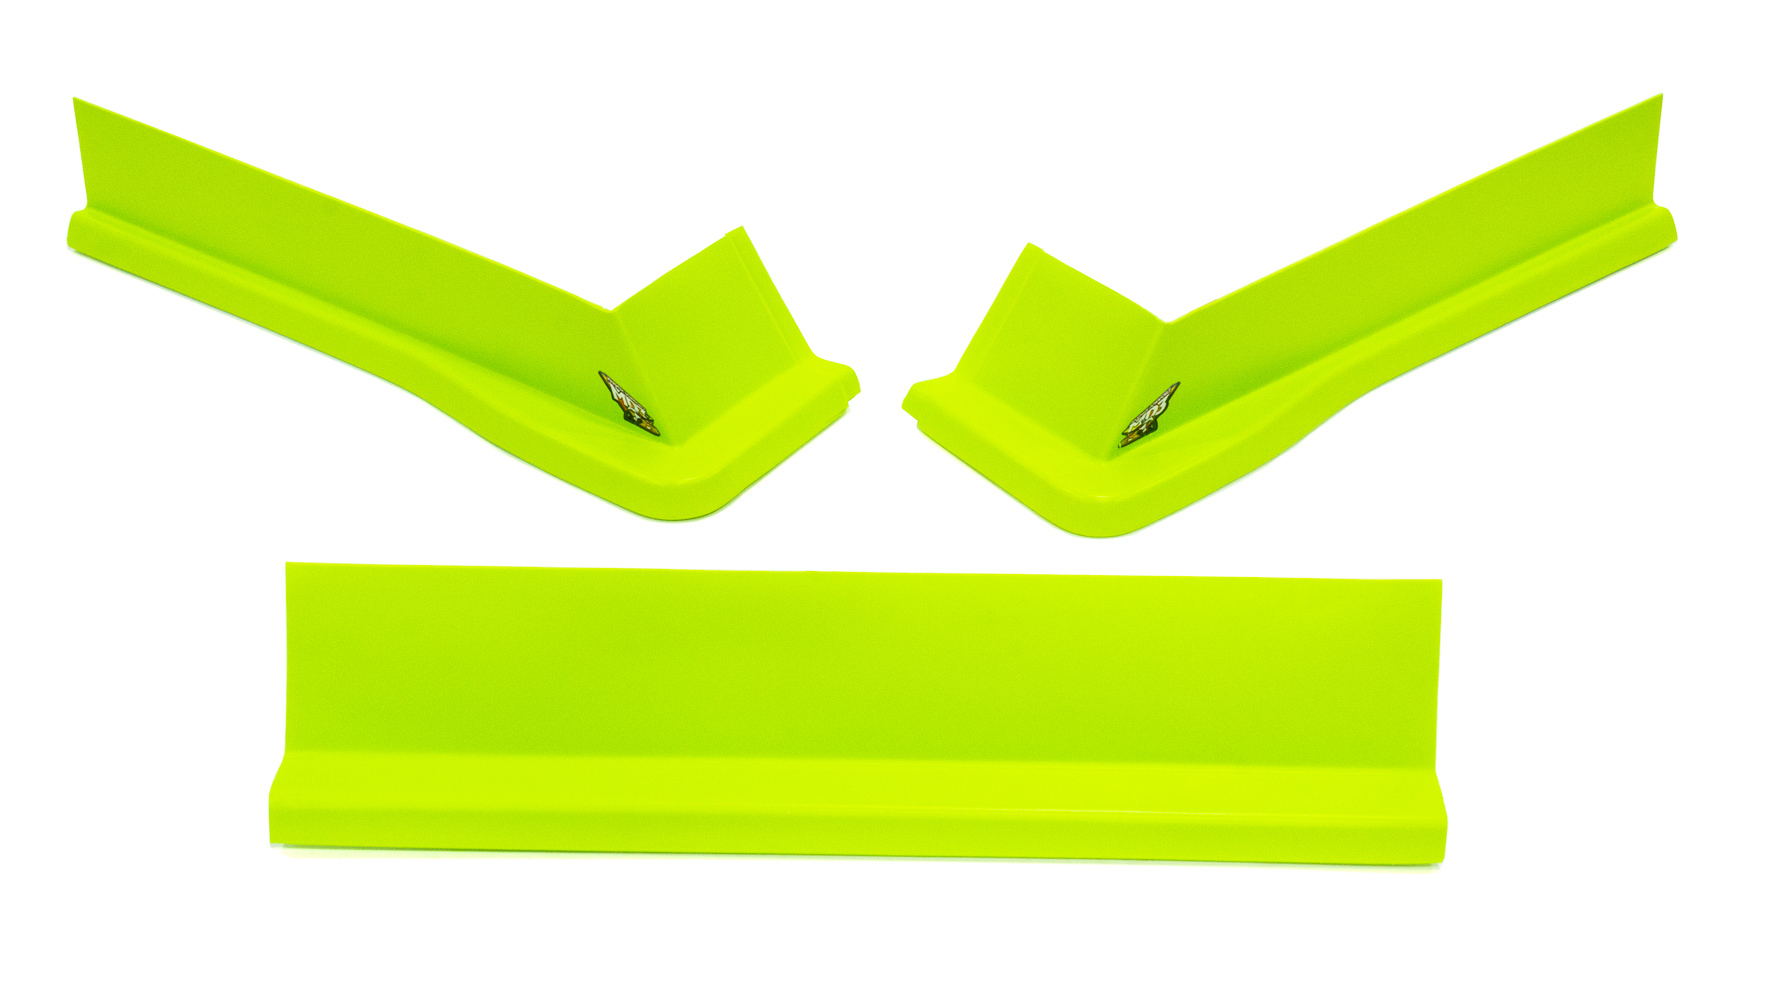 Air Valance - MD3 - 3 Piece - Molded Plastic - Fluorescent Green - Modified - Kit